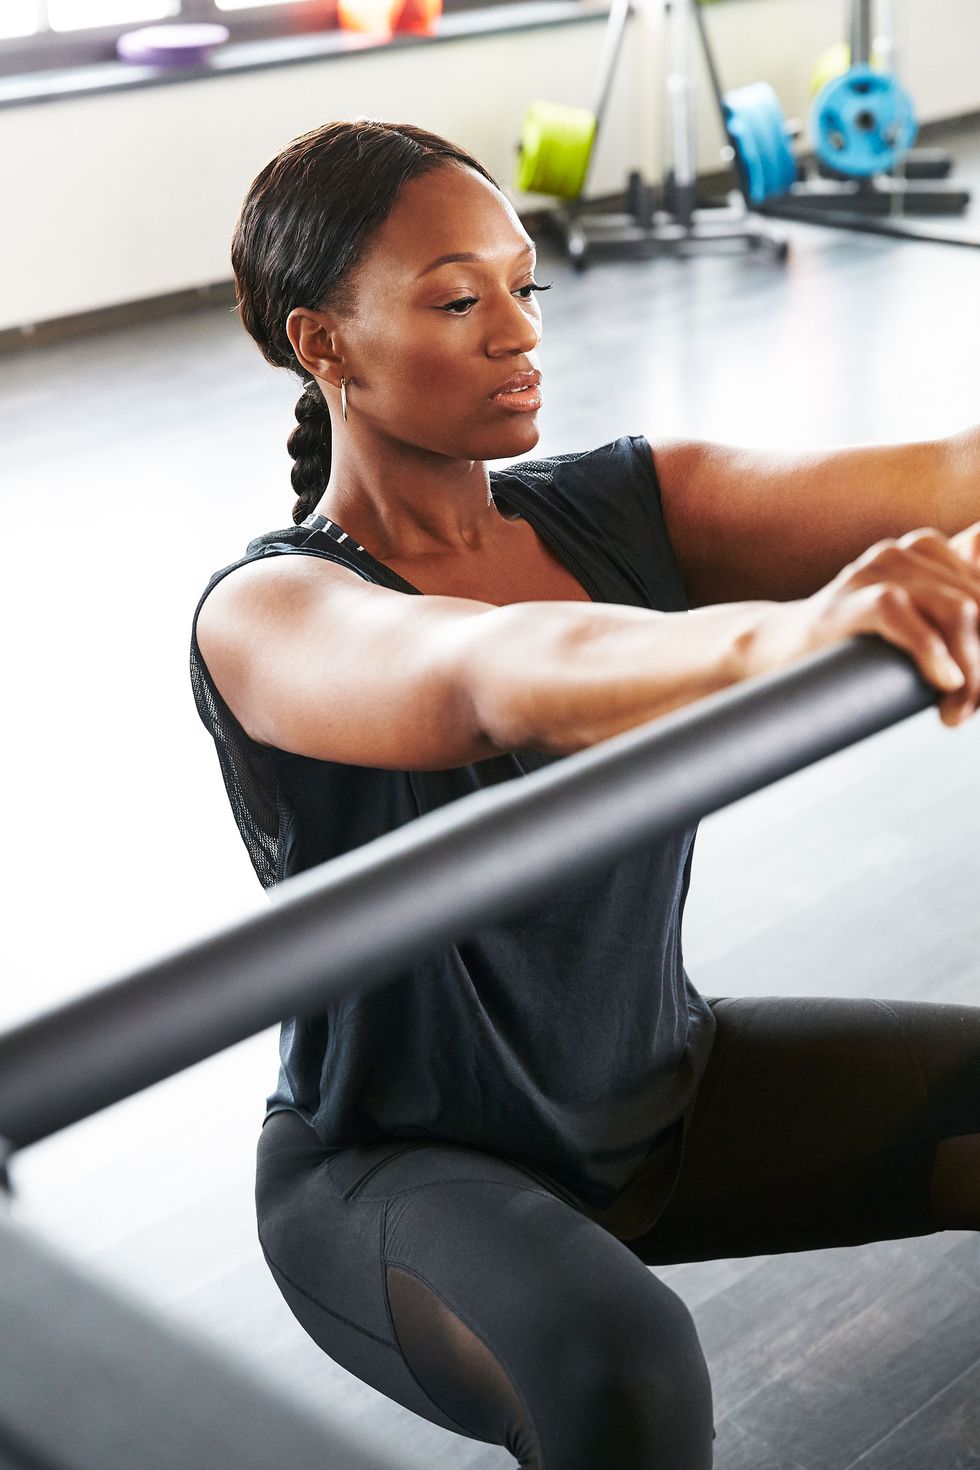 <p>"Warm up in a deep sitting position, while holding on to something for stability (a kitchen counter or the edge of your bed works), to mobilize the glutes and activate your back," explains Pisano. "This helps prepare your core for the intensive sequence."</p><p>Old Navy Light Support Ruched Cami Sports Bra in Black Stripe Top, $12, <a href="http://oldnavy.gap.com/browse/product.do?cid=1031681&vid=1&pid=429321142" target="_blank">oldnavy.com</a>; Nike T-Shirt With Back Panel Detail, $53.75, <a href="http://www.asos.com/Nike/Nike-T-Shirt-With-Back-Panel-Detail/Prod/pgeproduct.aspx?iid=5839328&istCompanyId=6f061ed0-7427-4b6c-bb90-987c0bd08468&istItemId=qwrrwtlxx&istBid=tztx&affid=14173&channelref=google+shopping&utm_source=google&utm_medium=ppc&utm_term=65701215872&utm_content=&utm_campaign=&cvosrc=ppc.google.65701215872&network=g&mobile=&search=1&content=&creative=84679695741&ptid=65701215872&adposition=1o1&r=2&mk=ab&gclid=CjwKEAiA2IO0BRDXmLndksSB0WgSJADNKqqoIVvvmFsFKL65ykts8W1CpgiHbVgsRoDv4-ueDe1erhoCfZrw_wcB" target="_blank">asos.com</a>; Old Navy Mesh-Panel Compression Leggings in Blackjack, $32.94, <a href="http://oldnavy.gap.com/browse/product.do?cid=53935&vid=1&pid=597001002" target="_blank">oldnavy.com</a>; Nike Air Zoom Fit Agility 2 in Black/White, $130, <a href="http://store.nike.com/us/en_us/pd/air-zoom-fit-agility-2-training-shoe/pid-10337859/pgid-10337860" target="_blank">nike.com</a></p>